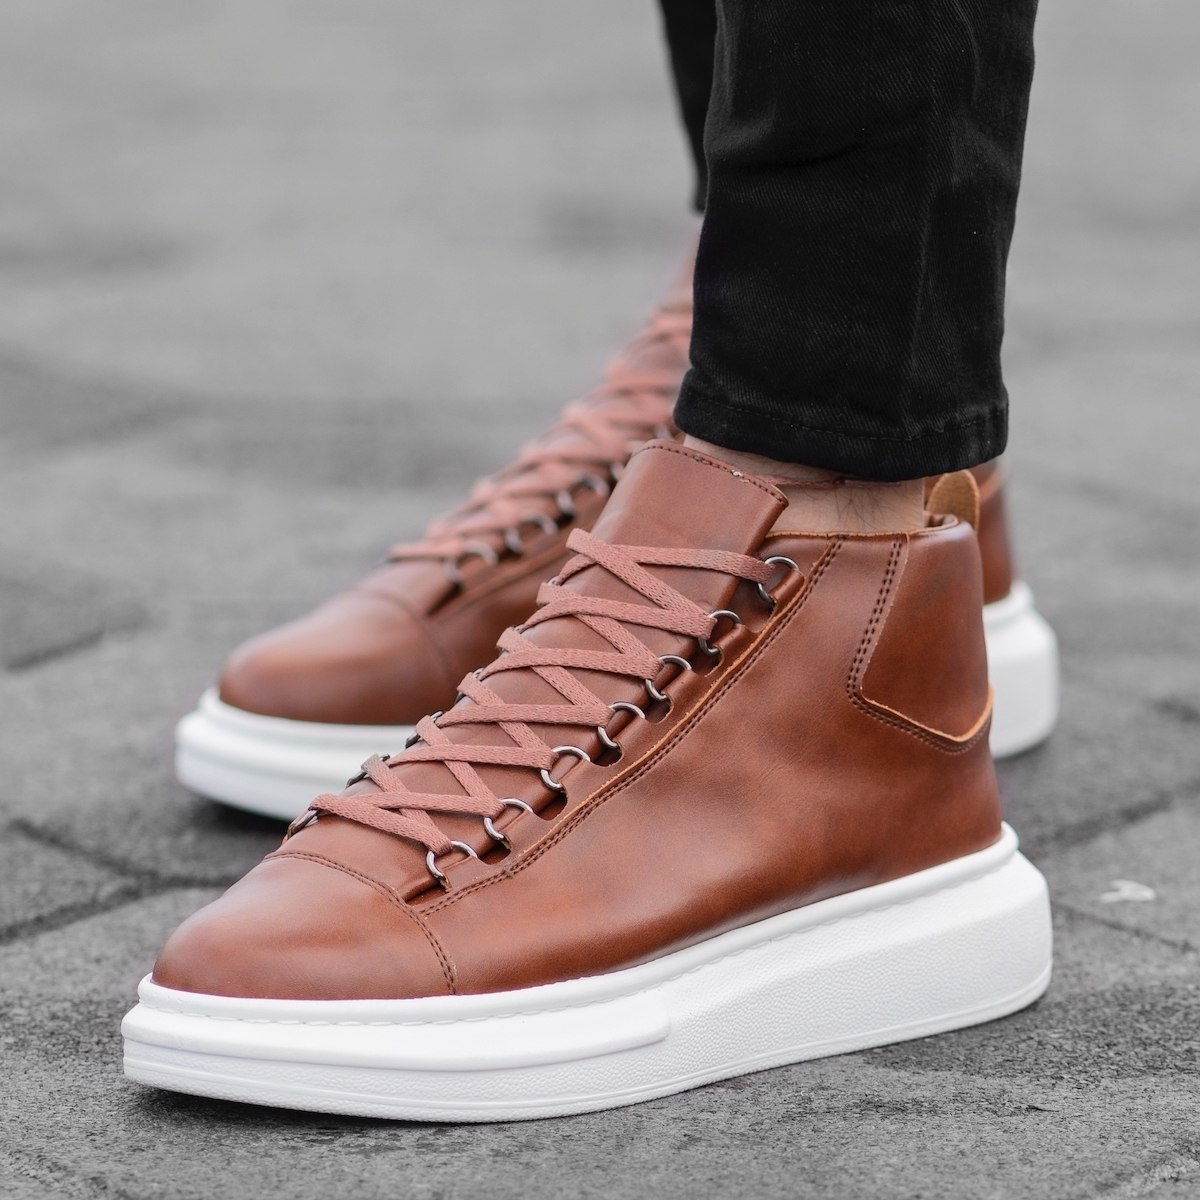 Men’s High Top Sneakers Shoes Taupe